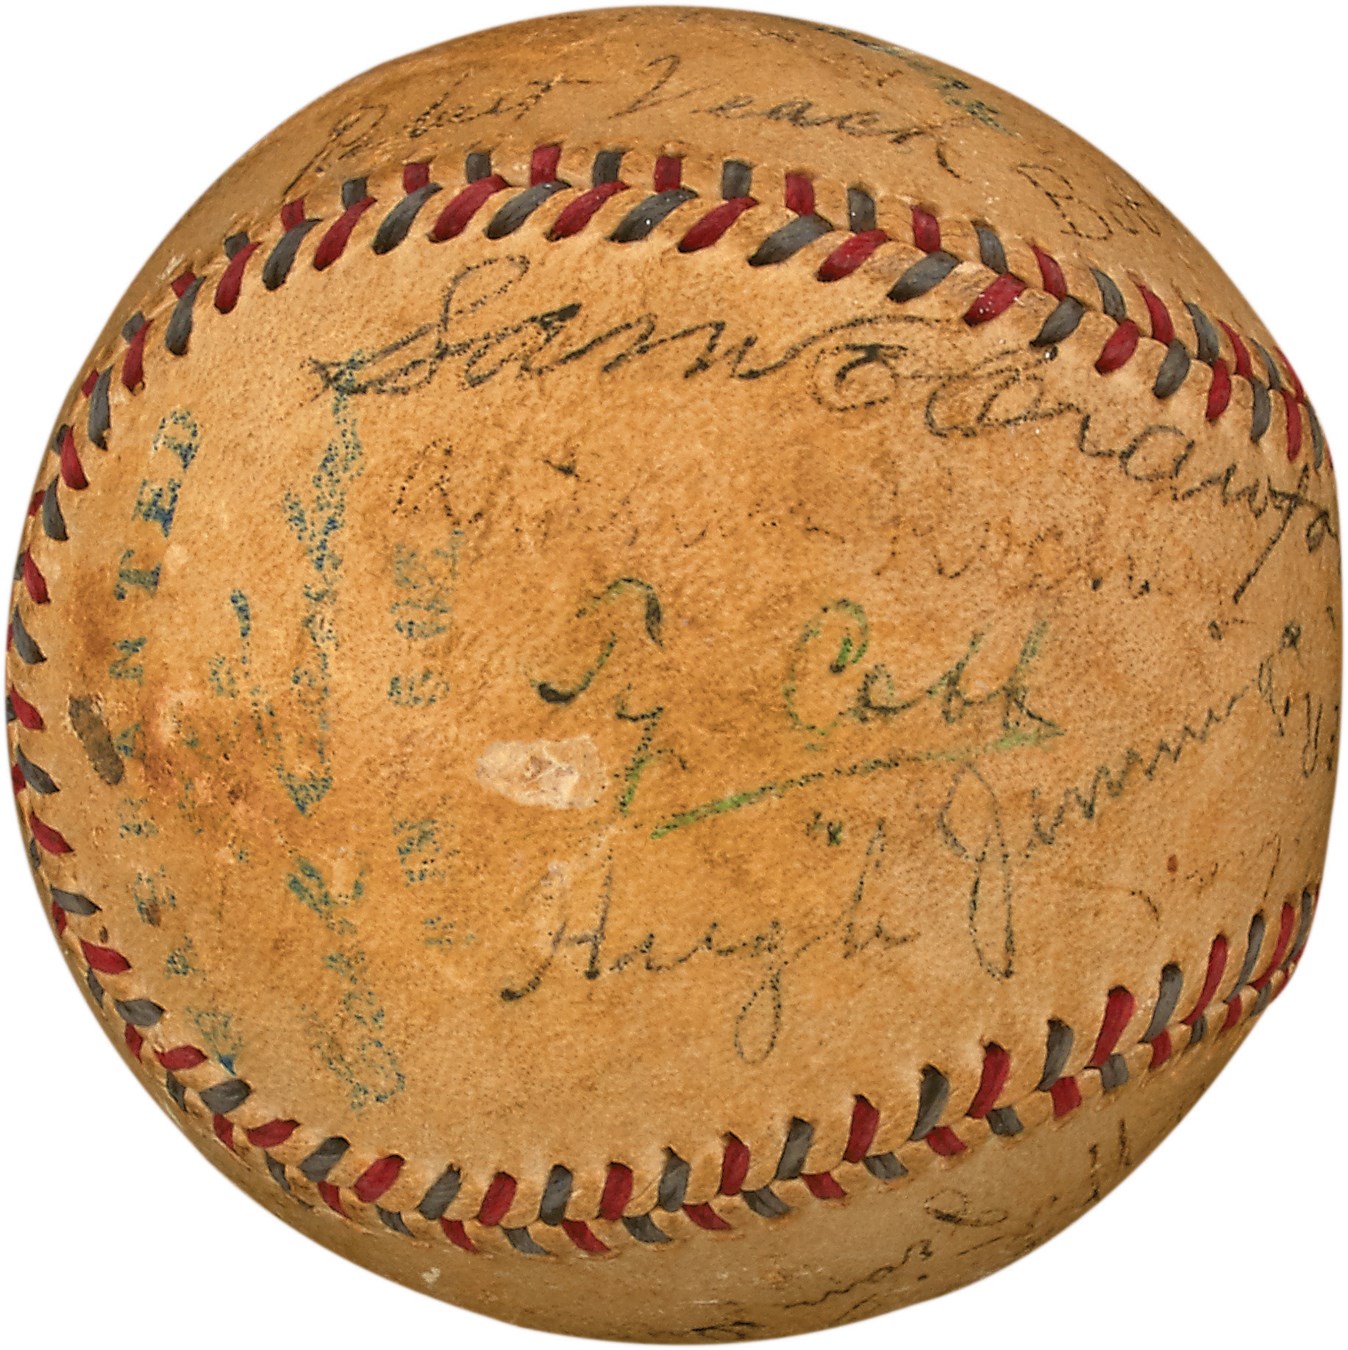 - 1916 Detroit Tigers Team-Signed Baseball with Jennings and Cobb (PSA)